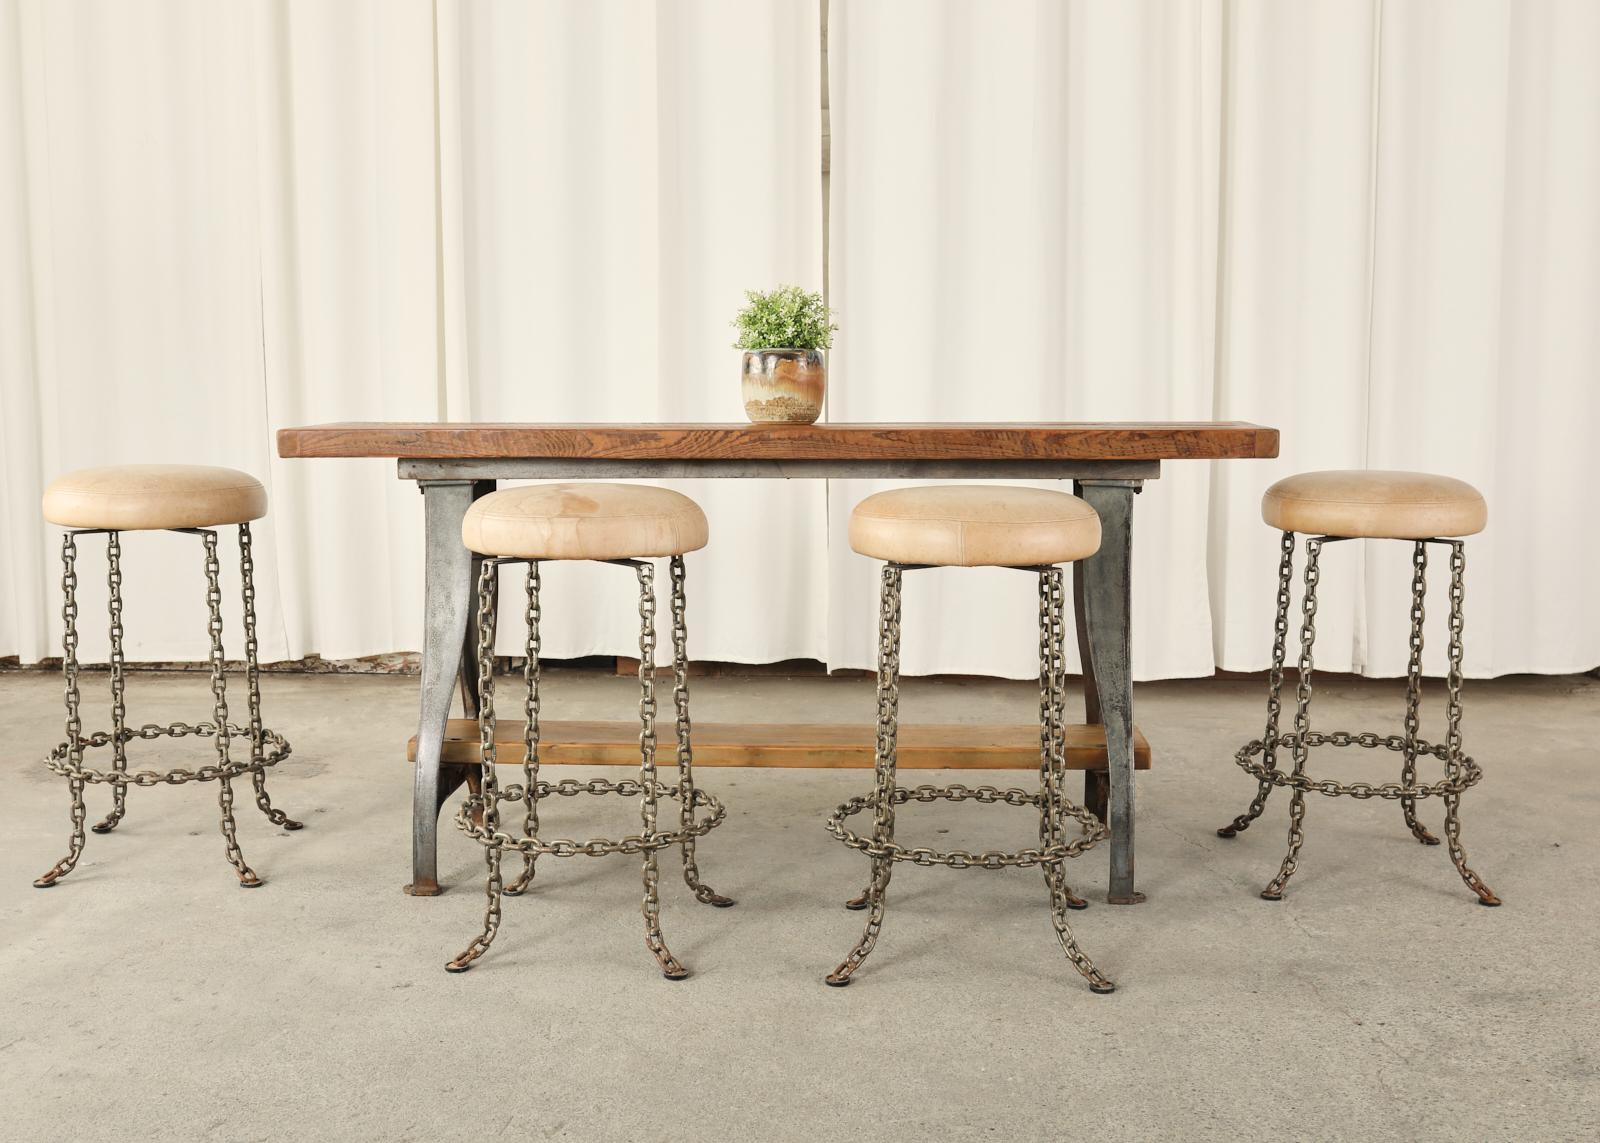 Chic set of four swivel barstools featuring an industrial style thick iron chain link base. Each stool is hand-crafted from chunky welded chain links having four legs that are splayed at the end conjoined by a round chain stretcher. Topped with 16